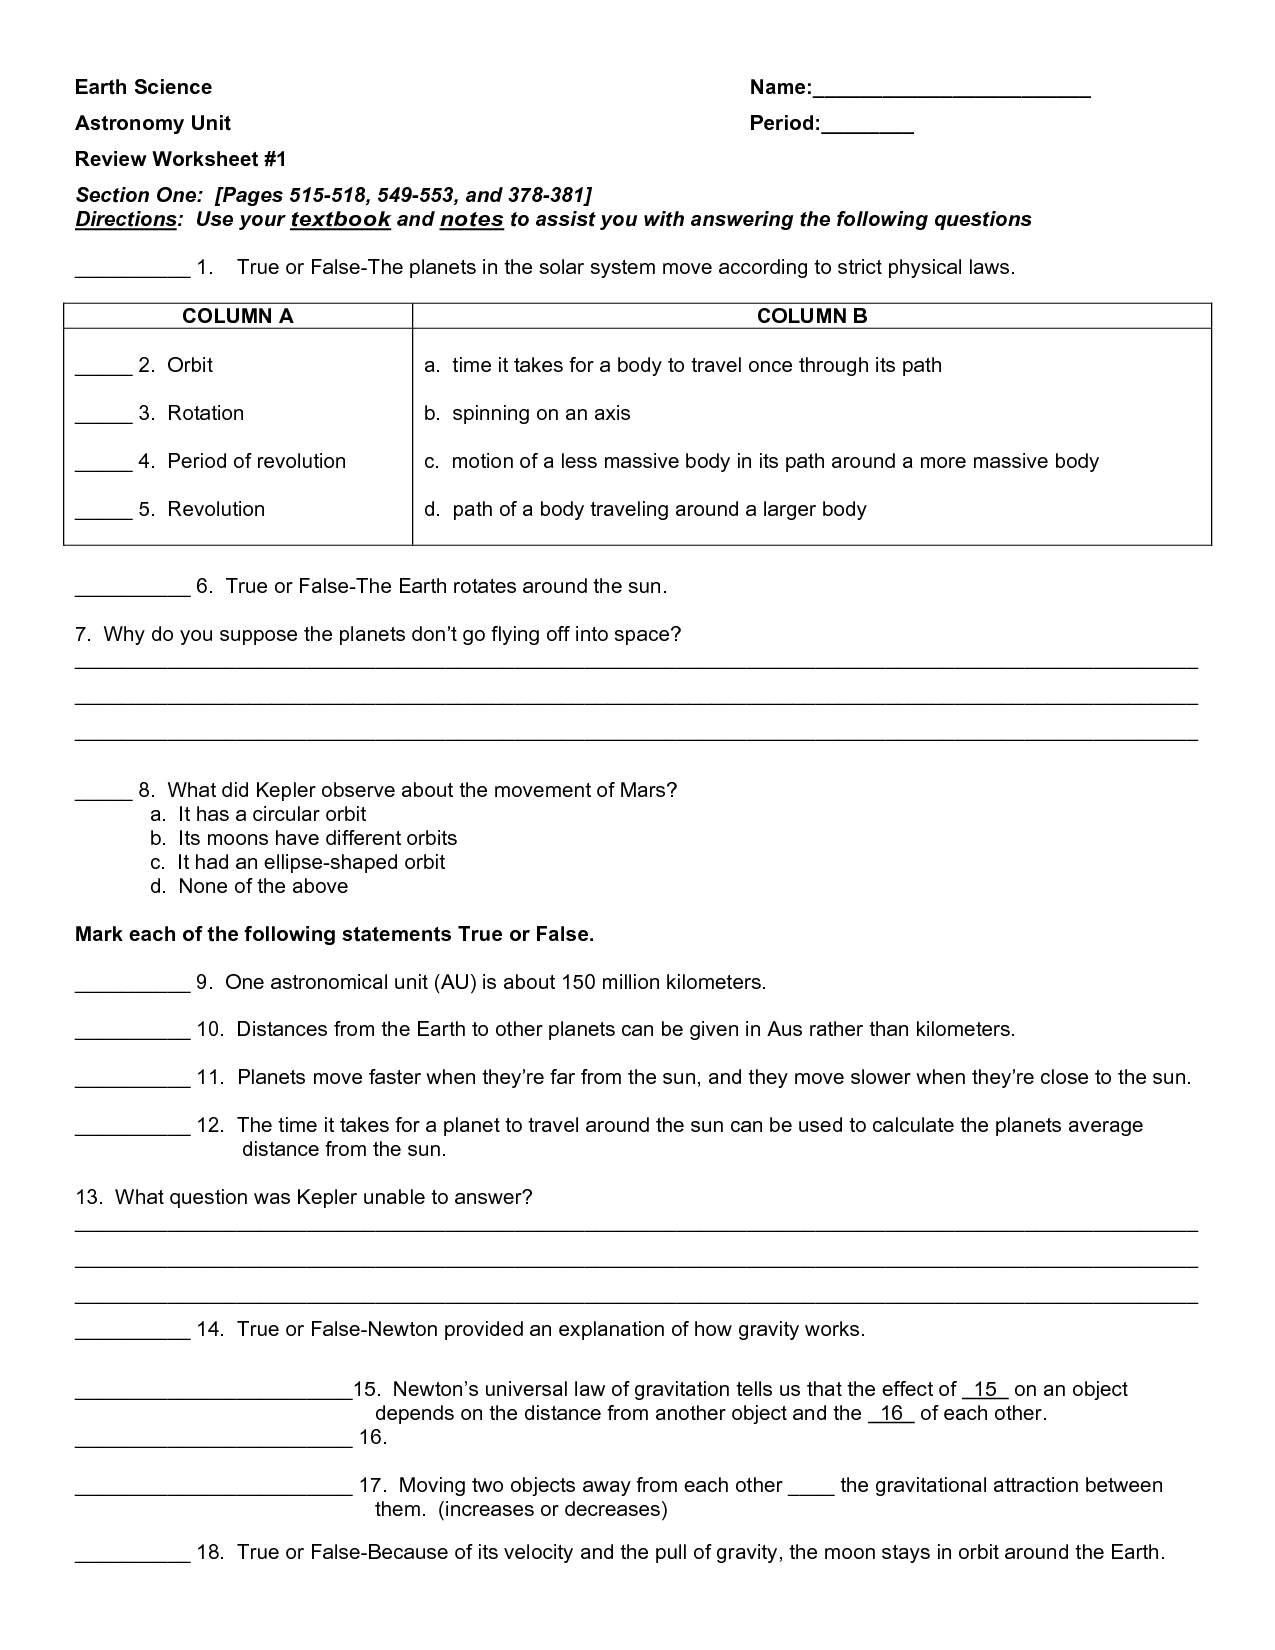 17-best-images-of-middle-school-earth-science-worksheets-earth